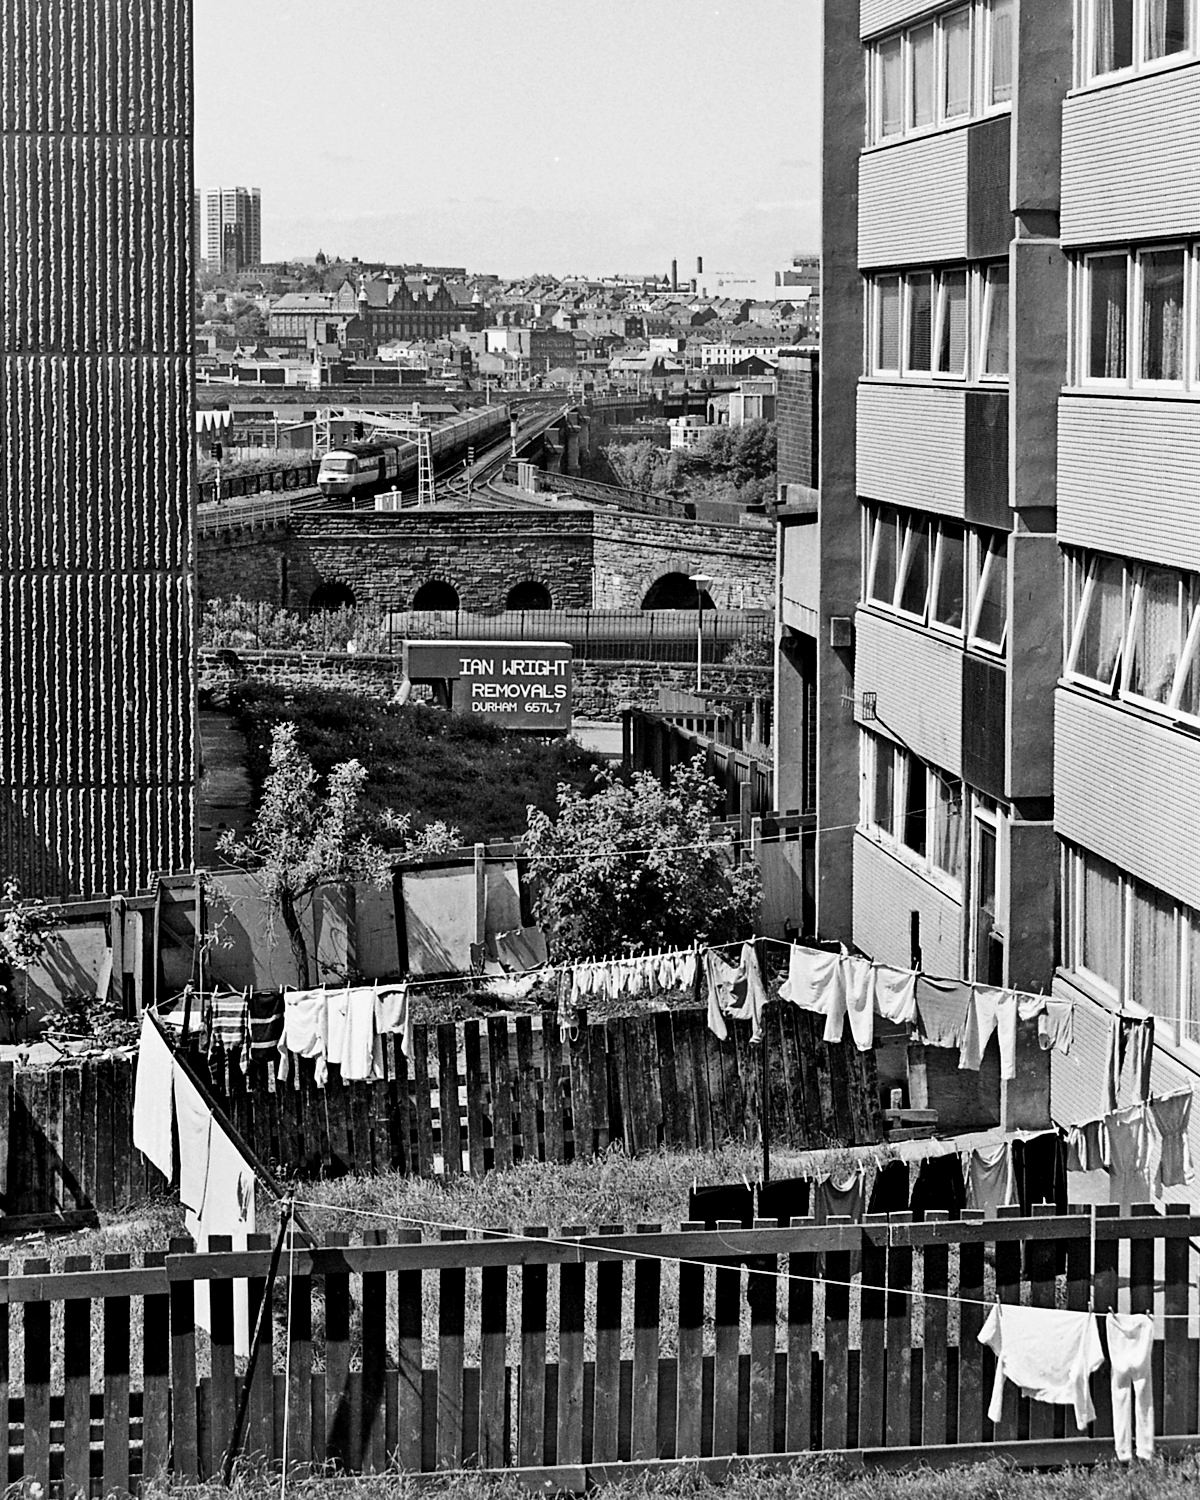 Washing day for some in St. Cuthbert’s Village in 1986 as an HST comes over the bridge from Newcastle.